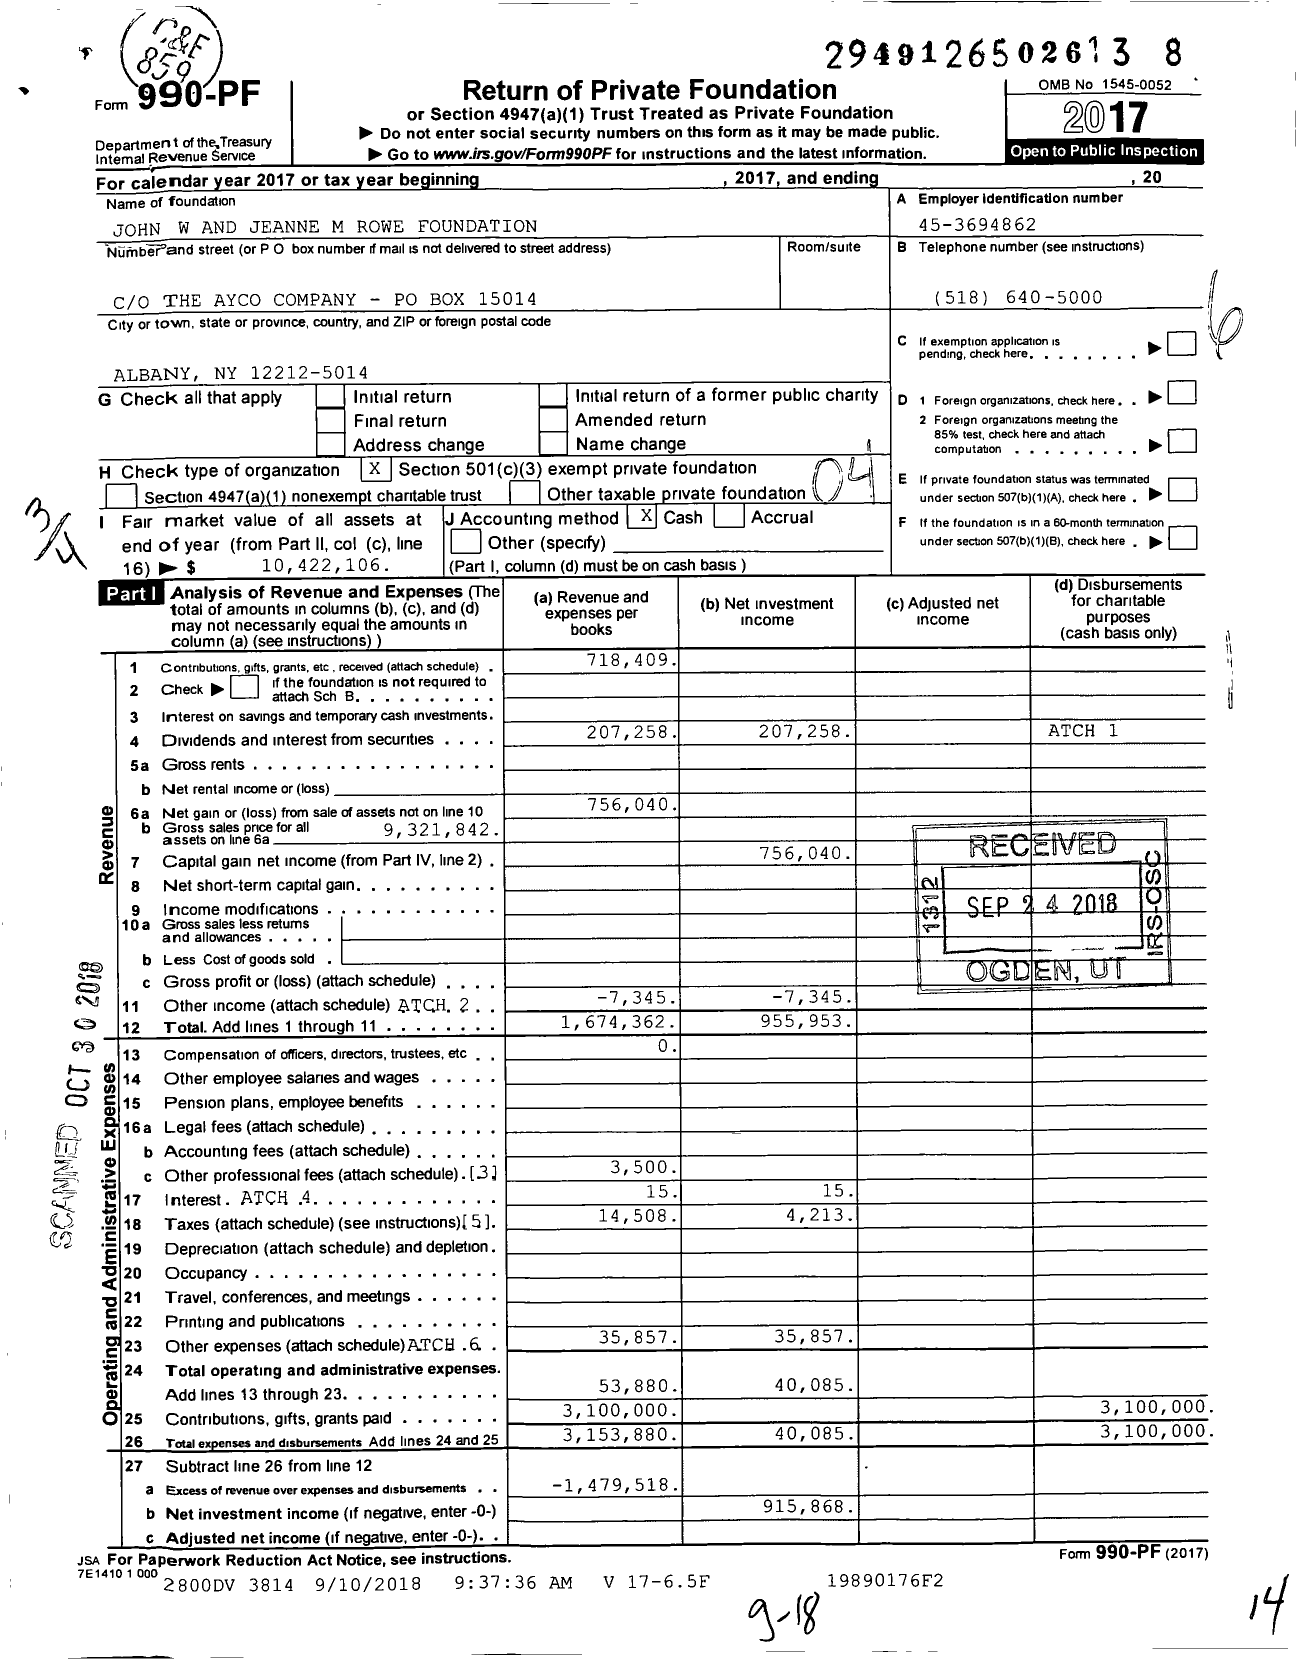 Image of first page of 2017 Form 990PF for John W and Jeanne M Rowe Foundation